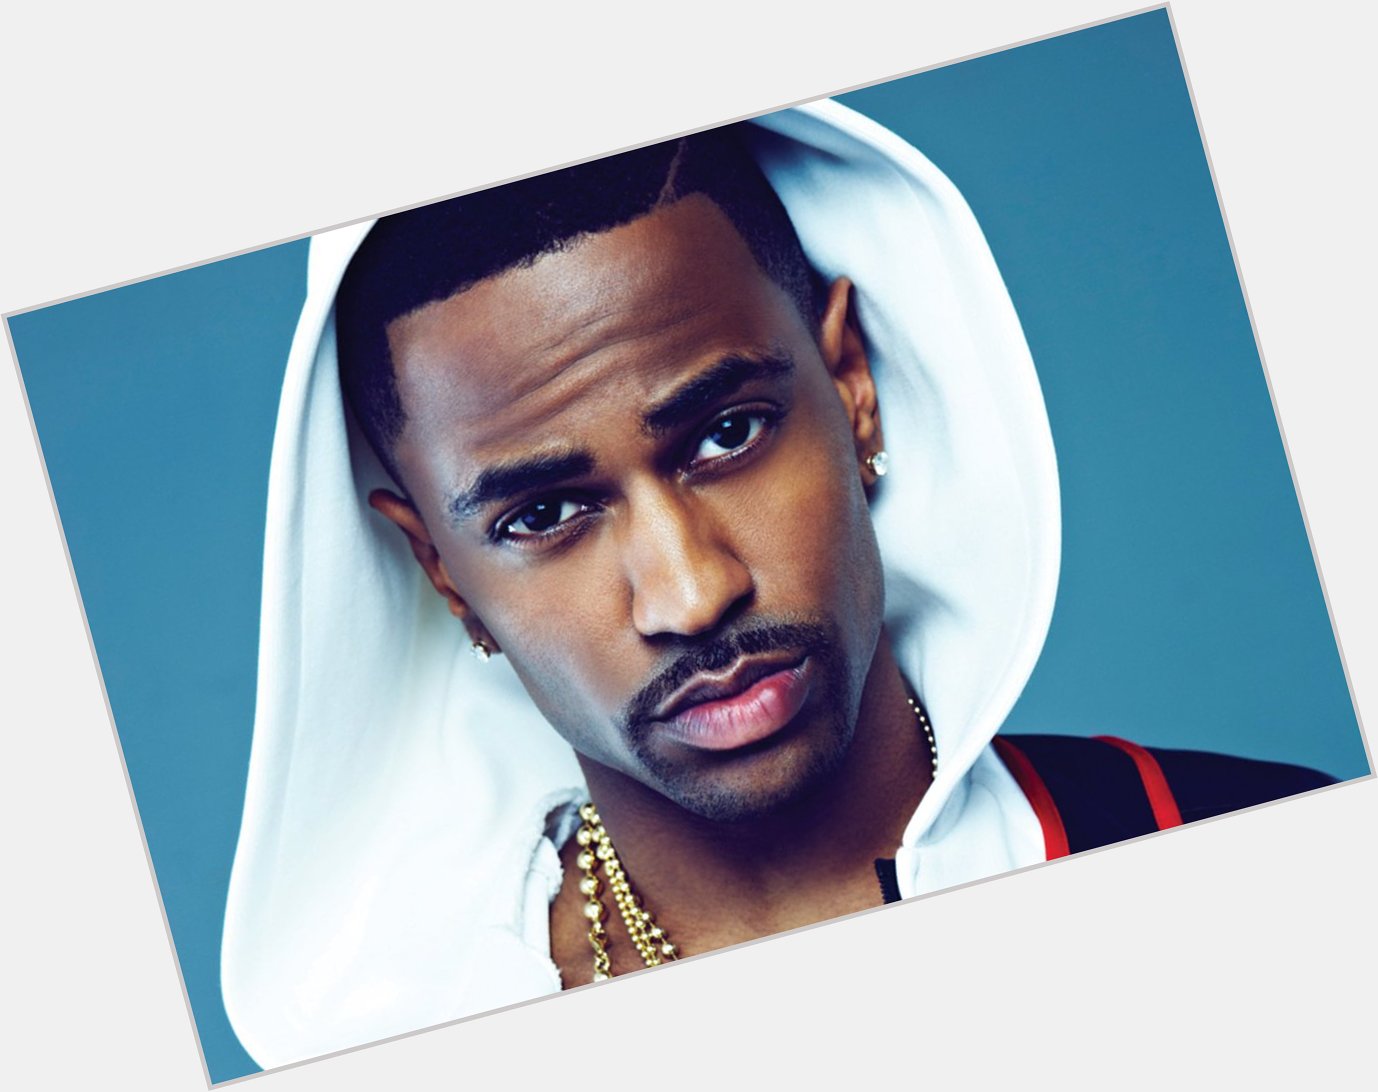 Happy Birthday to the handsome and talented Big Sean. The rapper turns 29 today! 